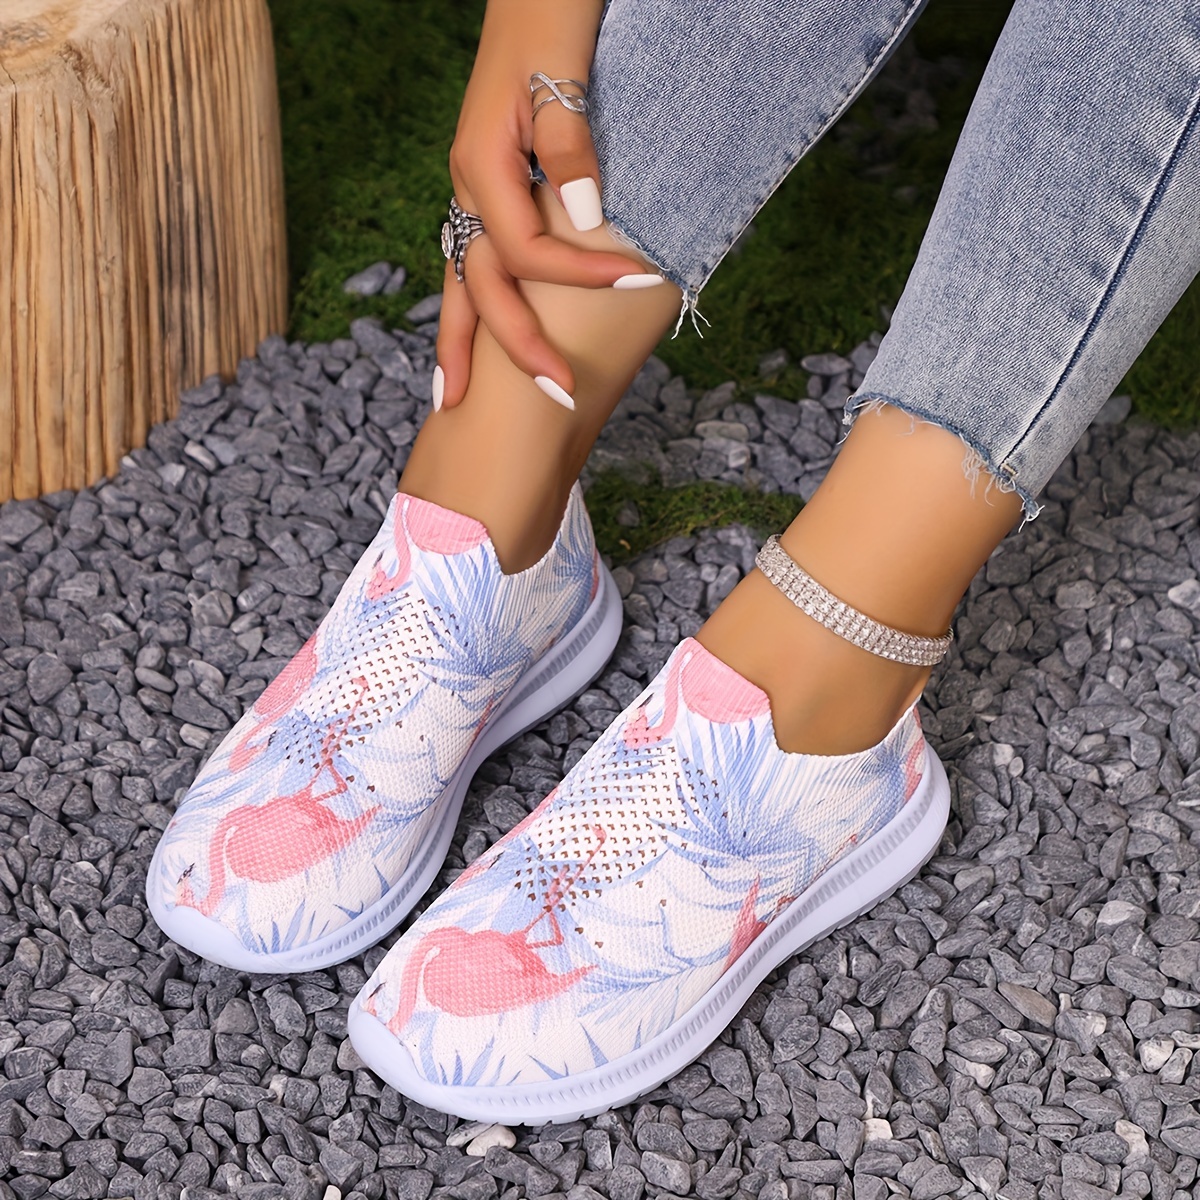 

Women's Breathable Flamingo Print Knit Sneakers, Fashion Casual Athletic Shoes, Comfortable Lightweight Slip-on, For Walking And Travel